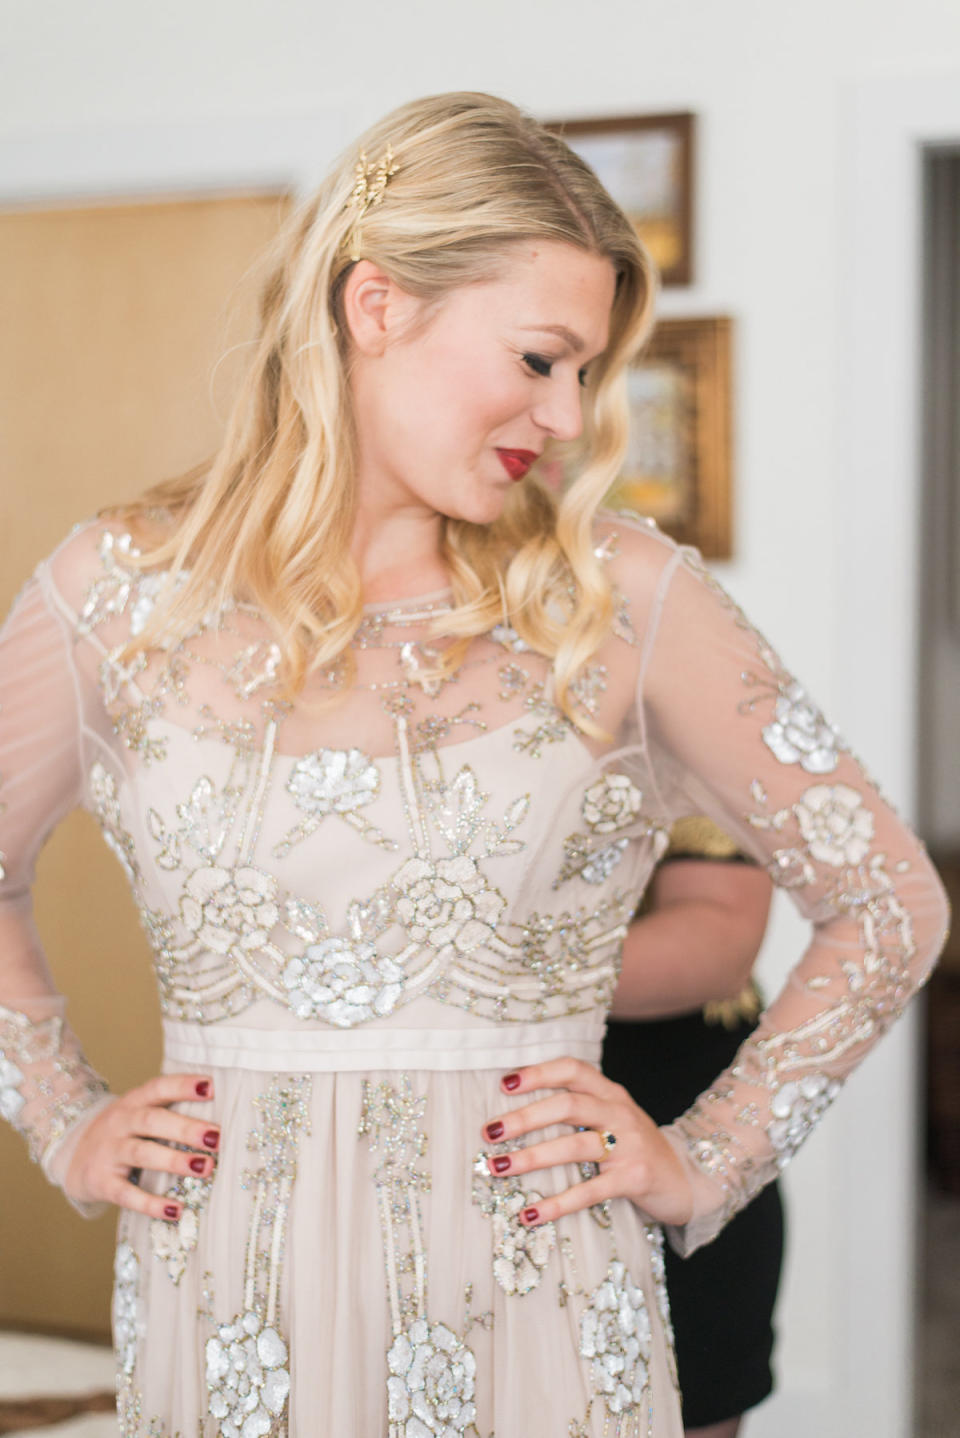 The bride went to <a href="http://www.huffingtonpost.com/topic/bhldn">BHLDN</a> for her dress. "When you plan a wedding in six weeks, you need a dress that fits and can be taken home that day."